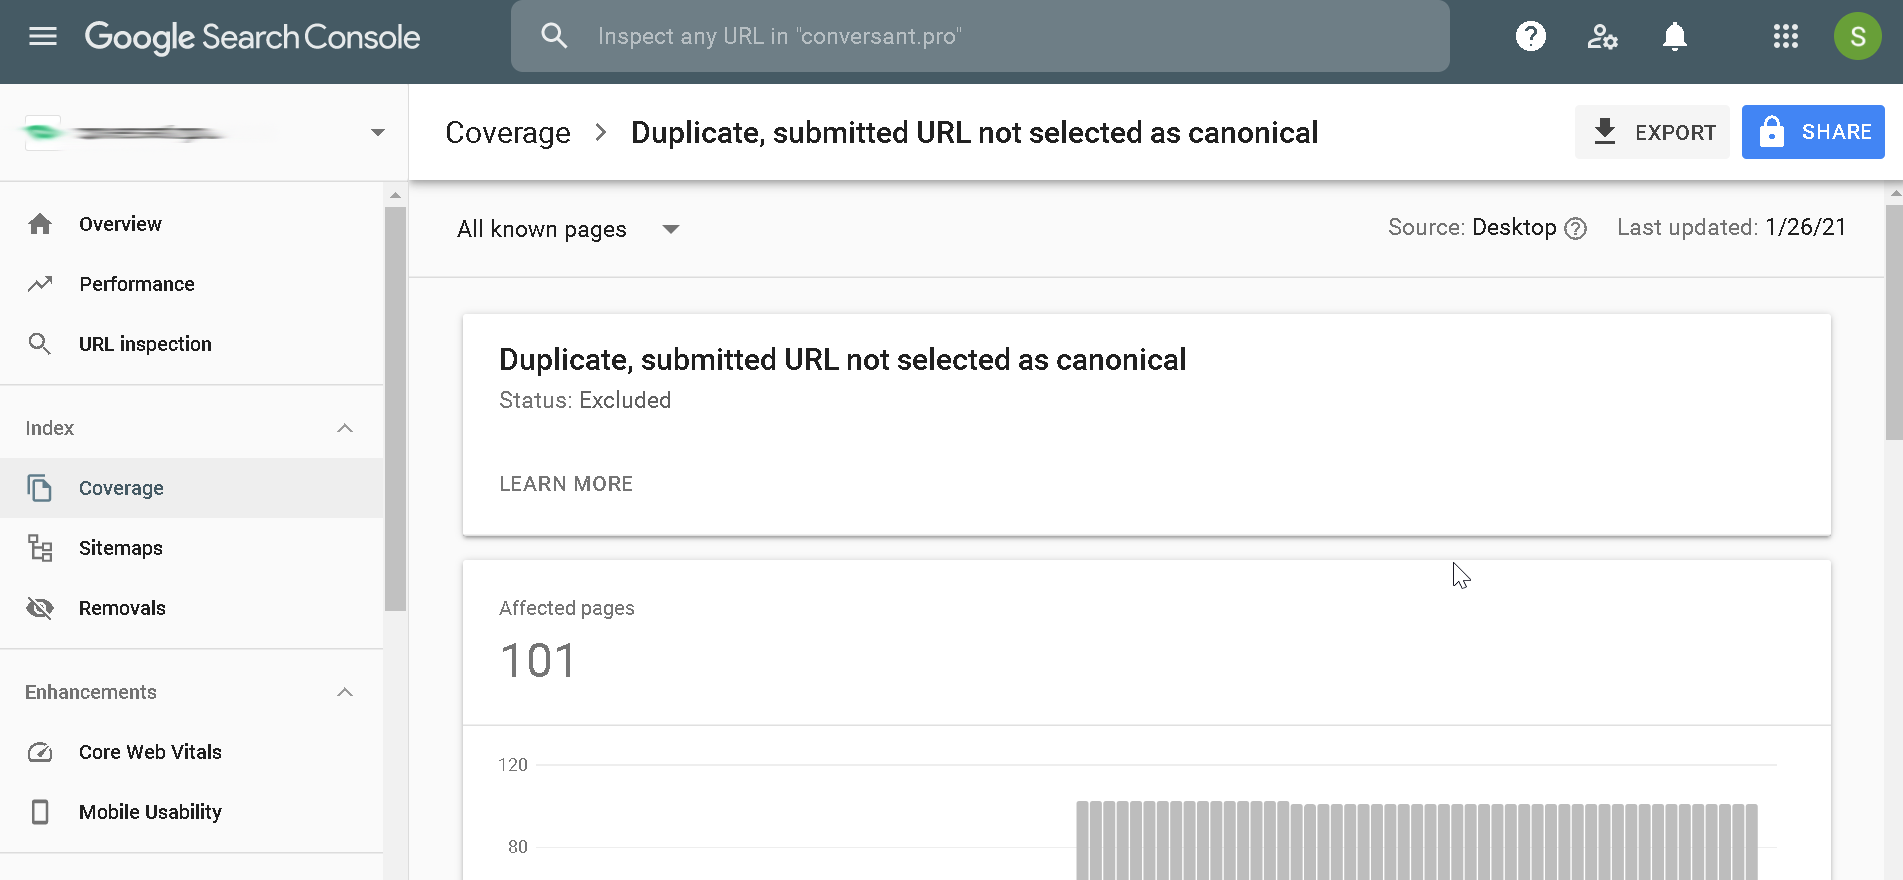 Submitted URL contains a duplicate page